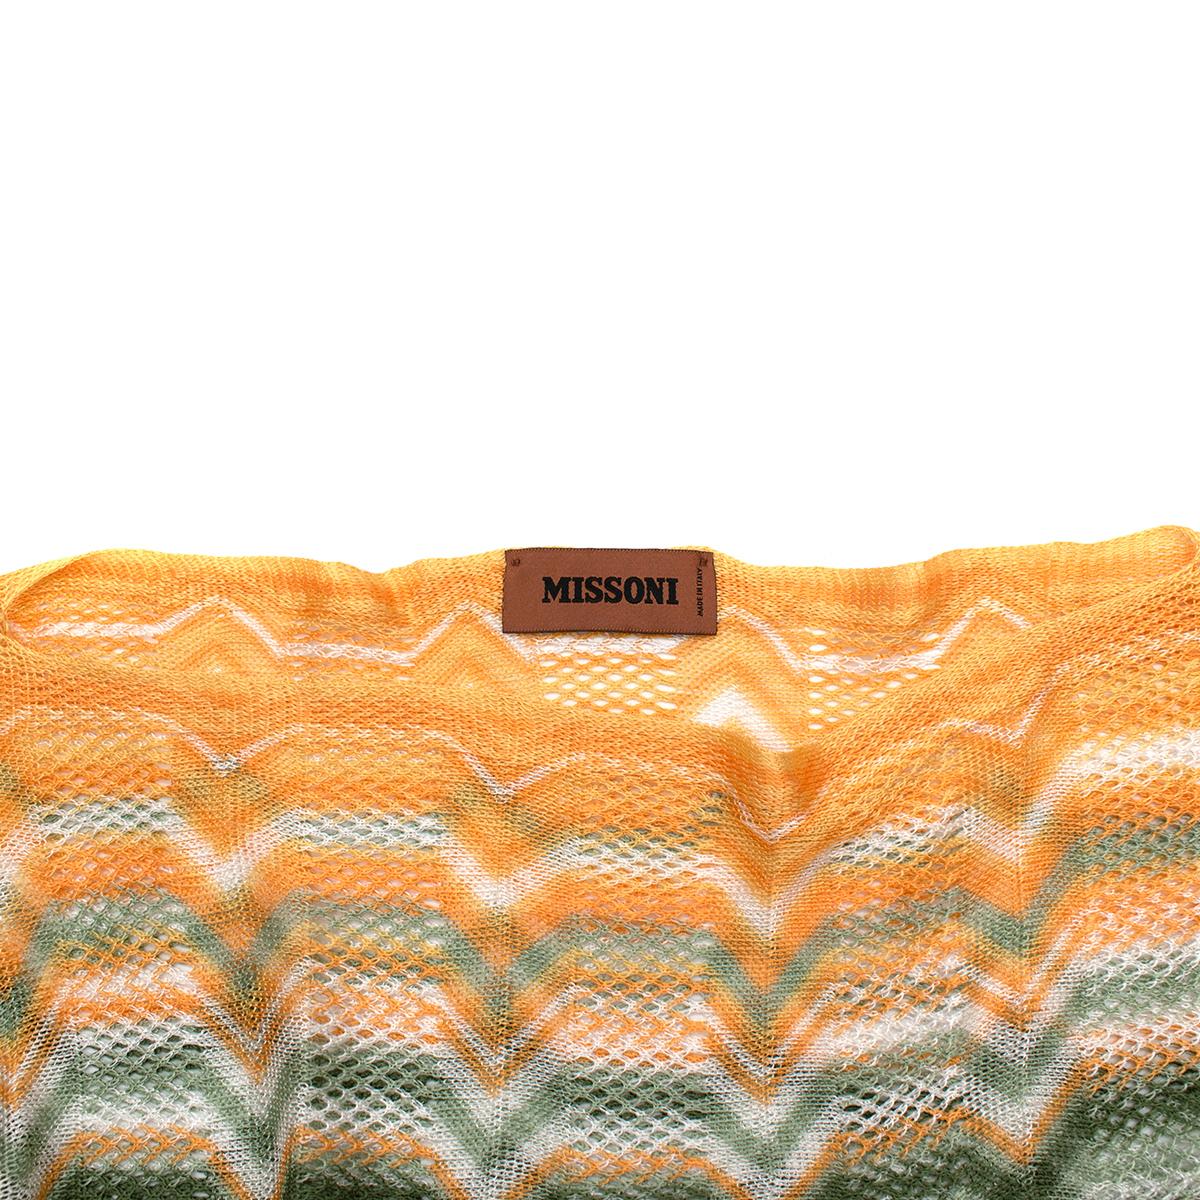 Missoni Multicolour Knit Cropped Poncho In Excellent Condition For Sale In London, GB